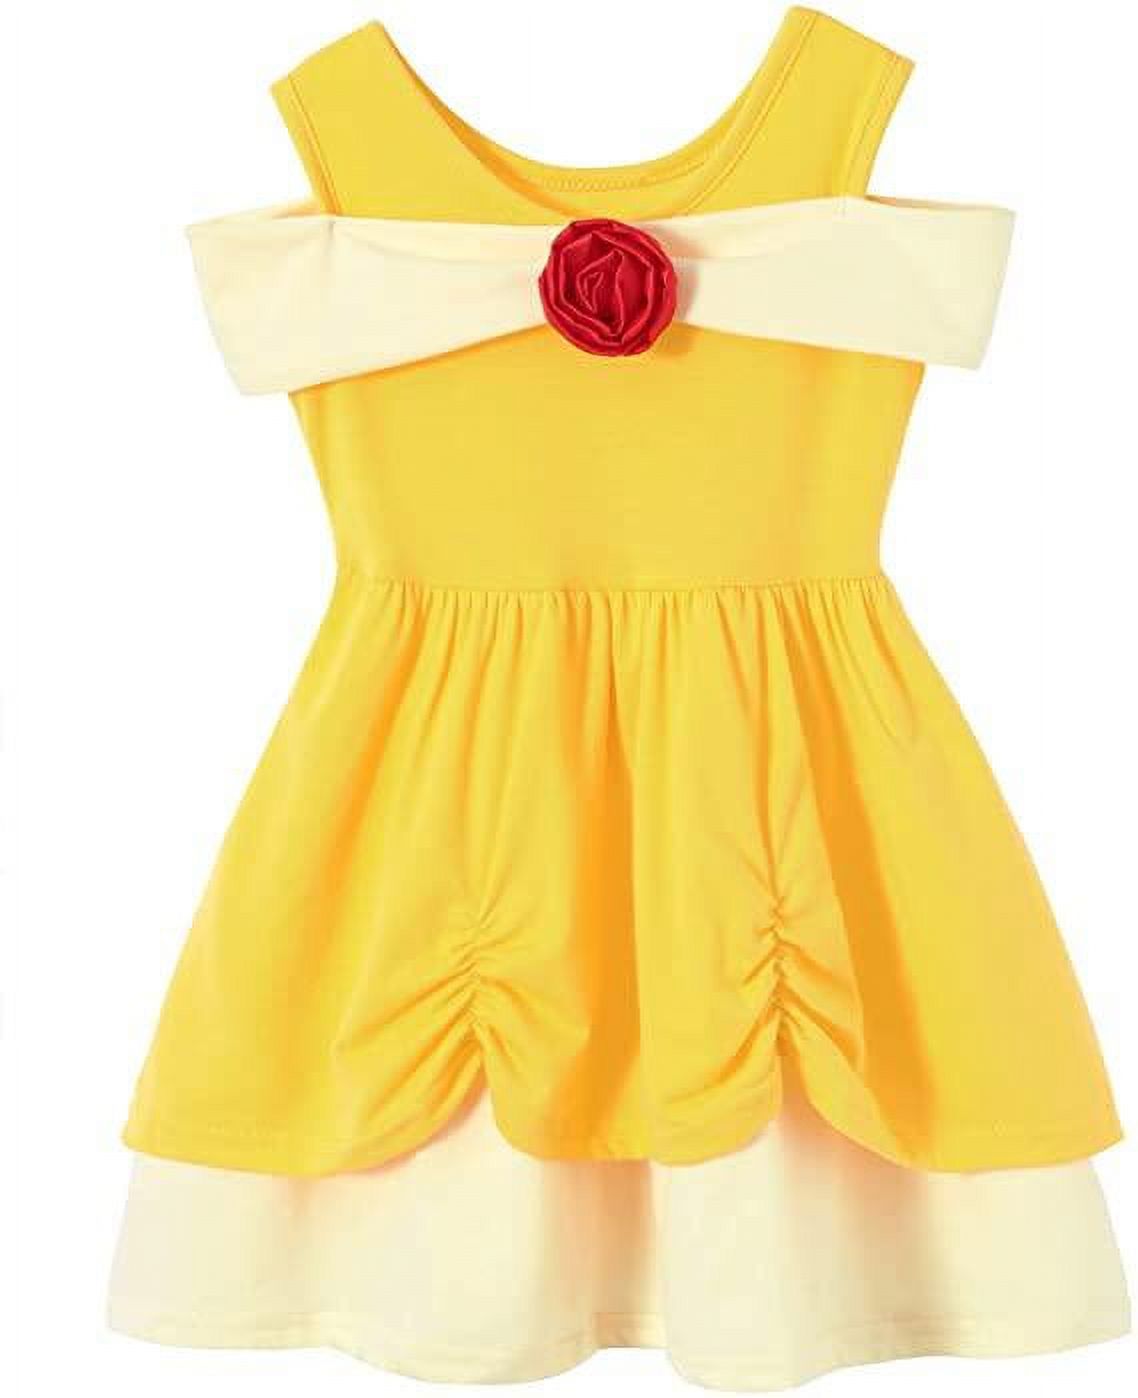 Cotton Baby Girl Clothes Summer Little Princess Toddler Kids Party Tutu Dresses - image 1 of 6